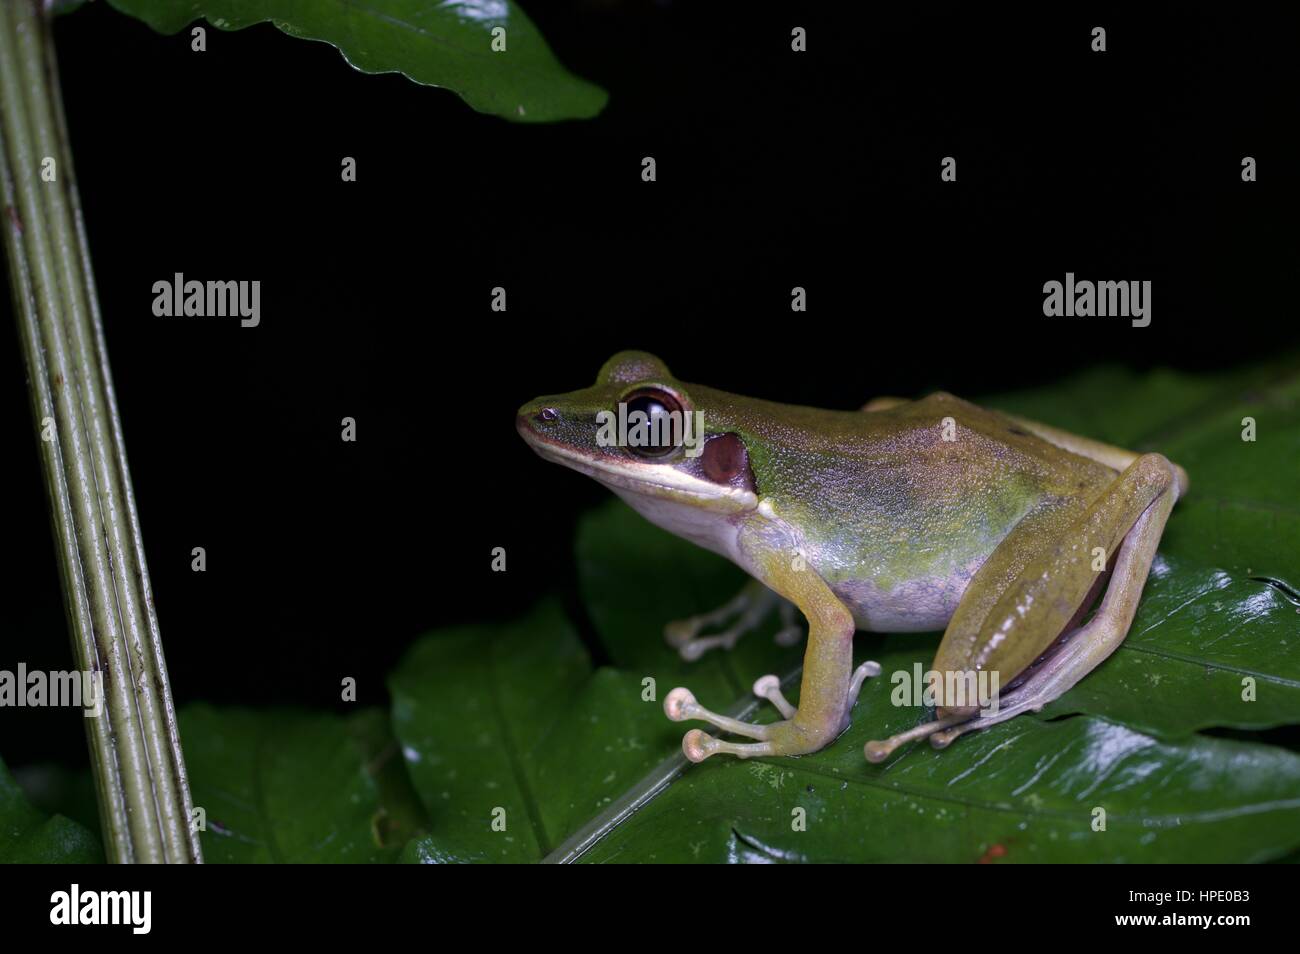 A White-lipped Frog (Chalcorana labialis) on a plant at night in the rainforest in Batang Kali, Selangor, Malaysia Stock Photo